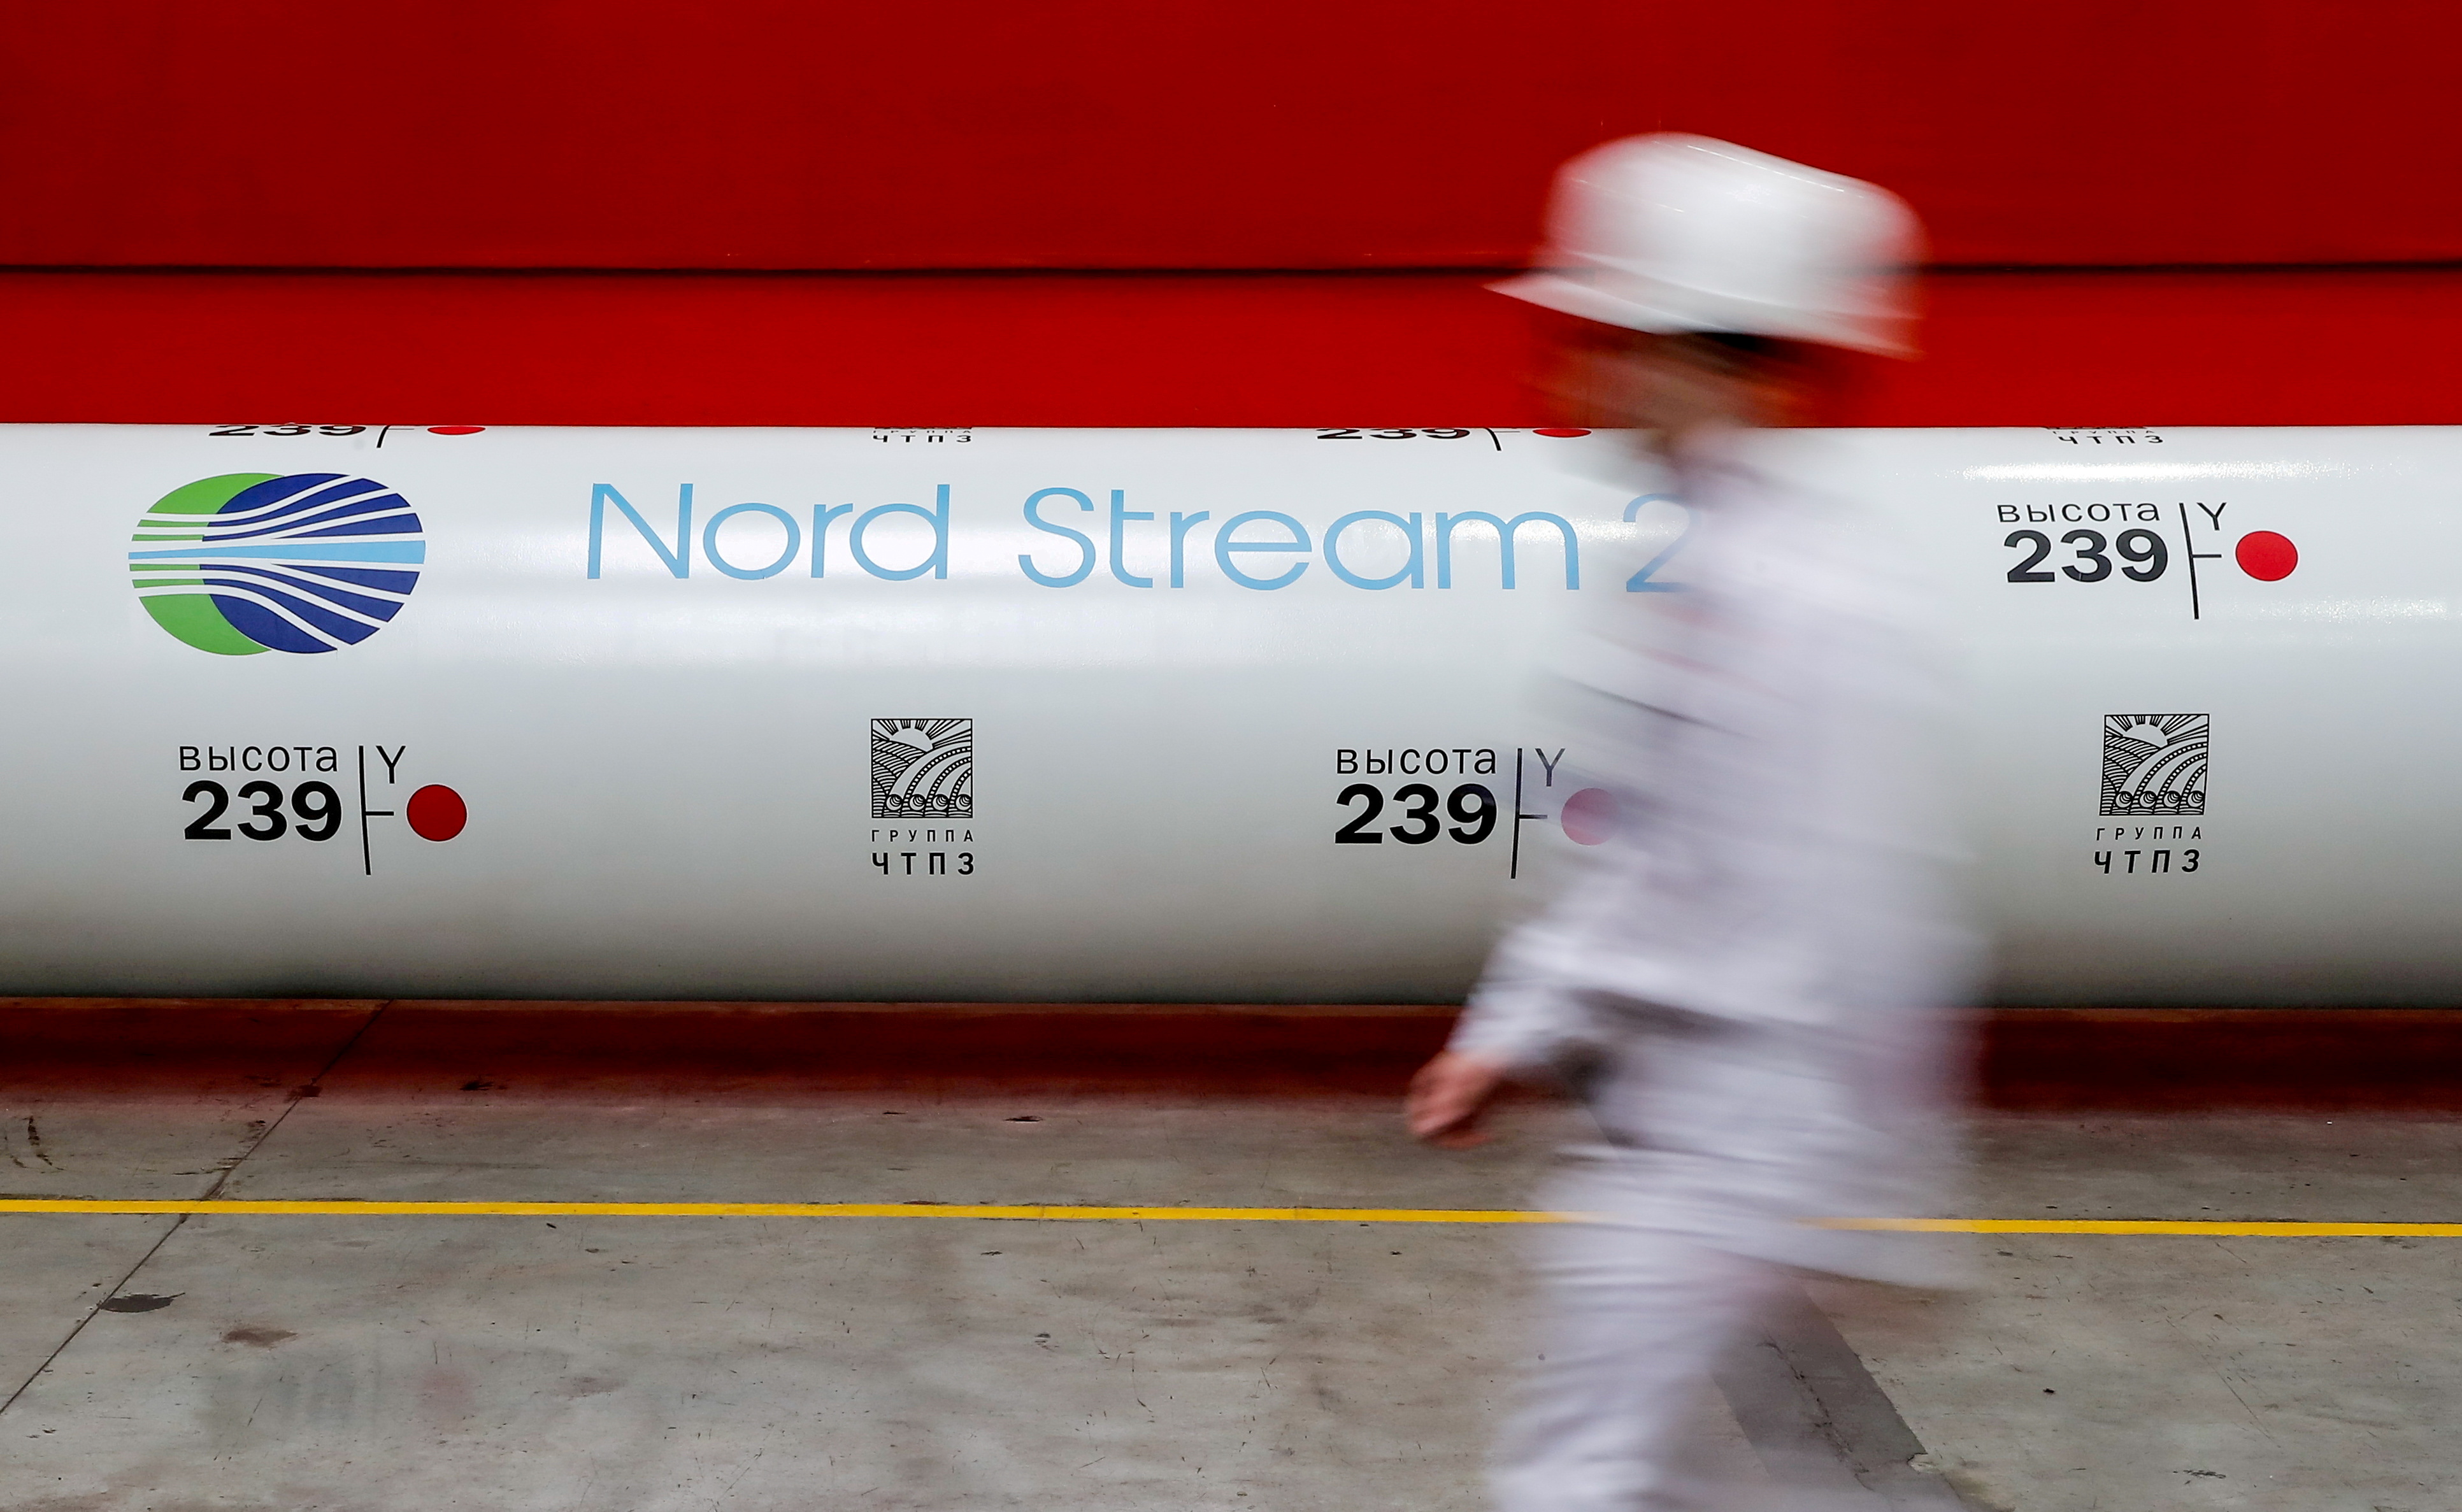 The logo of the Nord Stream 2 gas pipeline project is seen on a pipe at the Chelyabinsk pipe rolling plant in Chelyabinsk, Russia, February 26, 2020. REUTERS/Maxim Shemetov